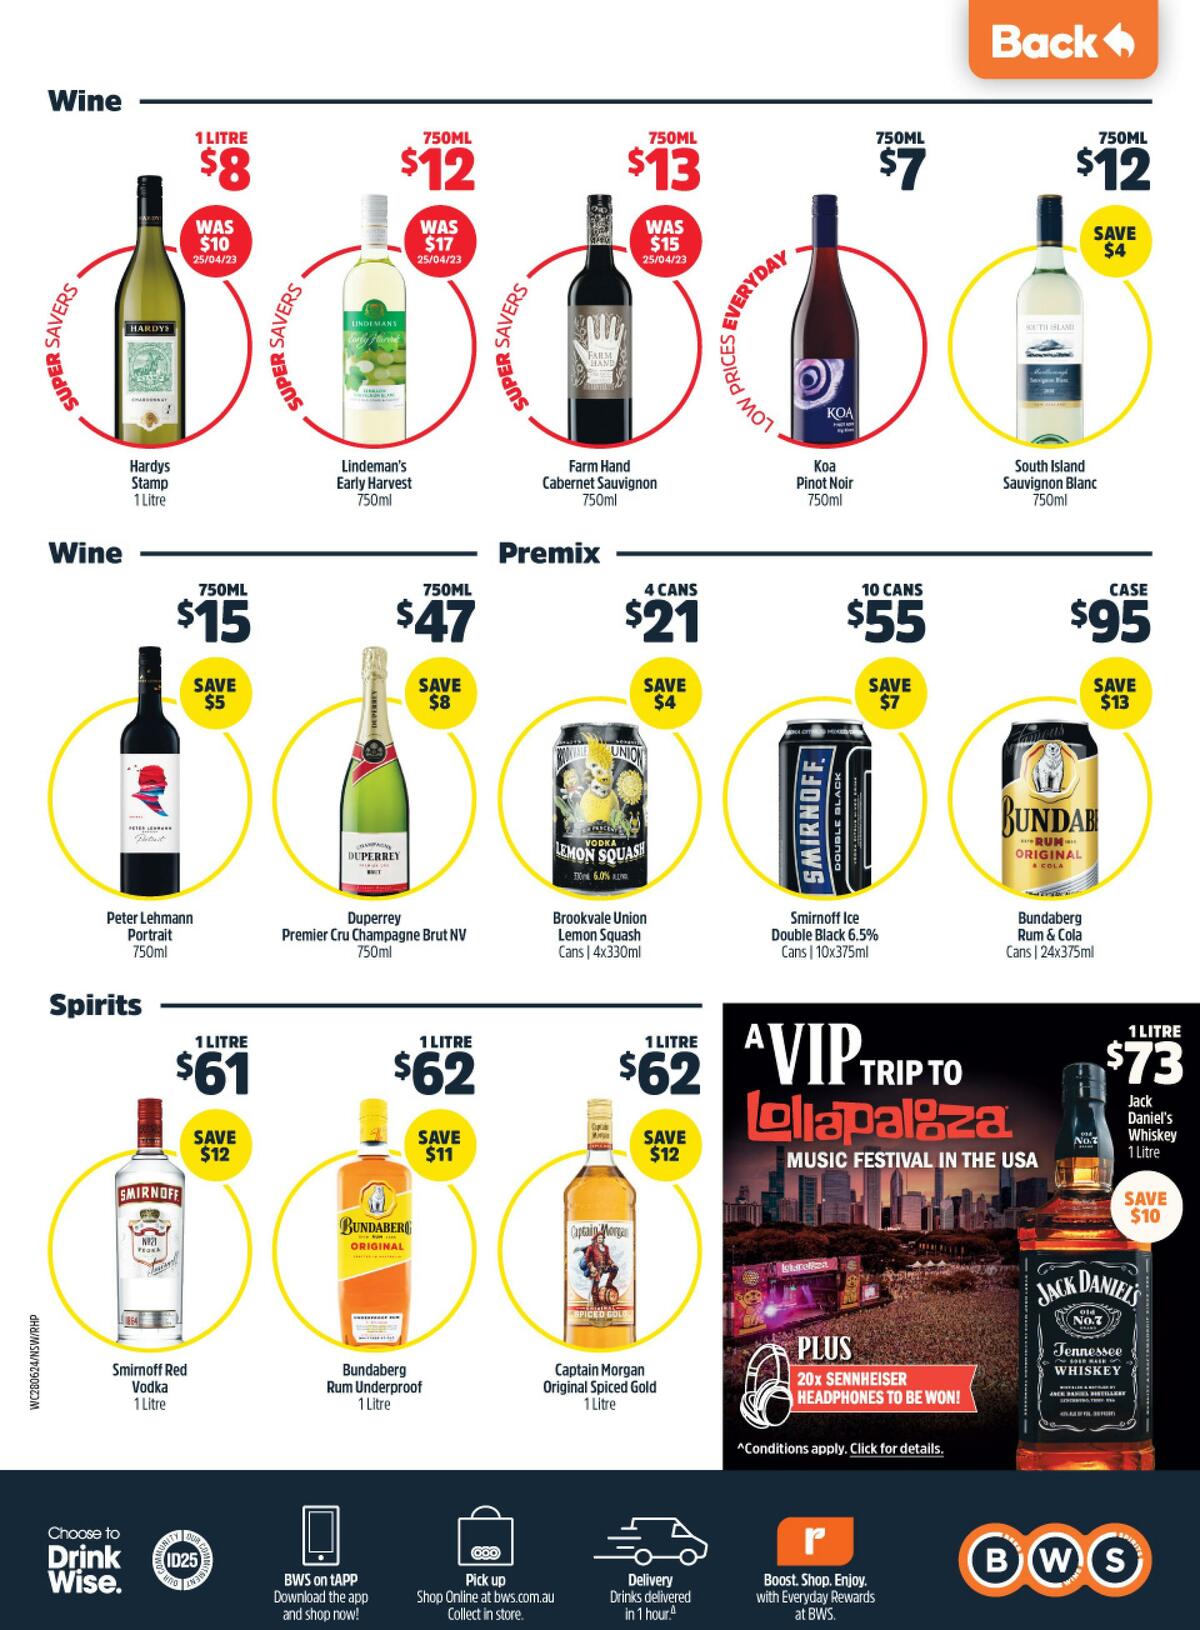 Woolworths Catalogues from 28 June